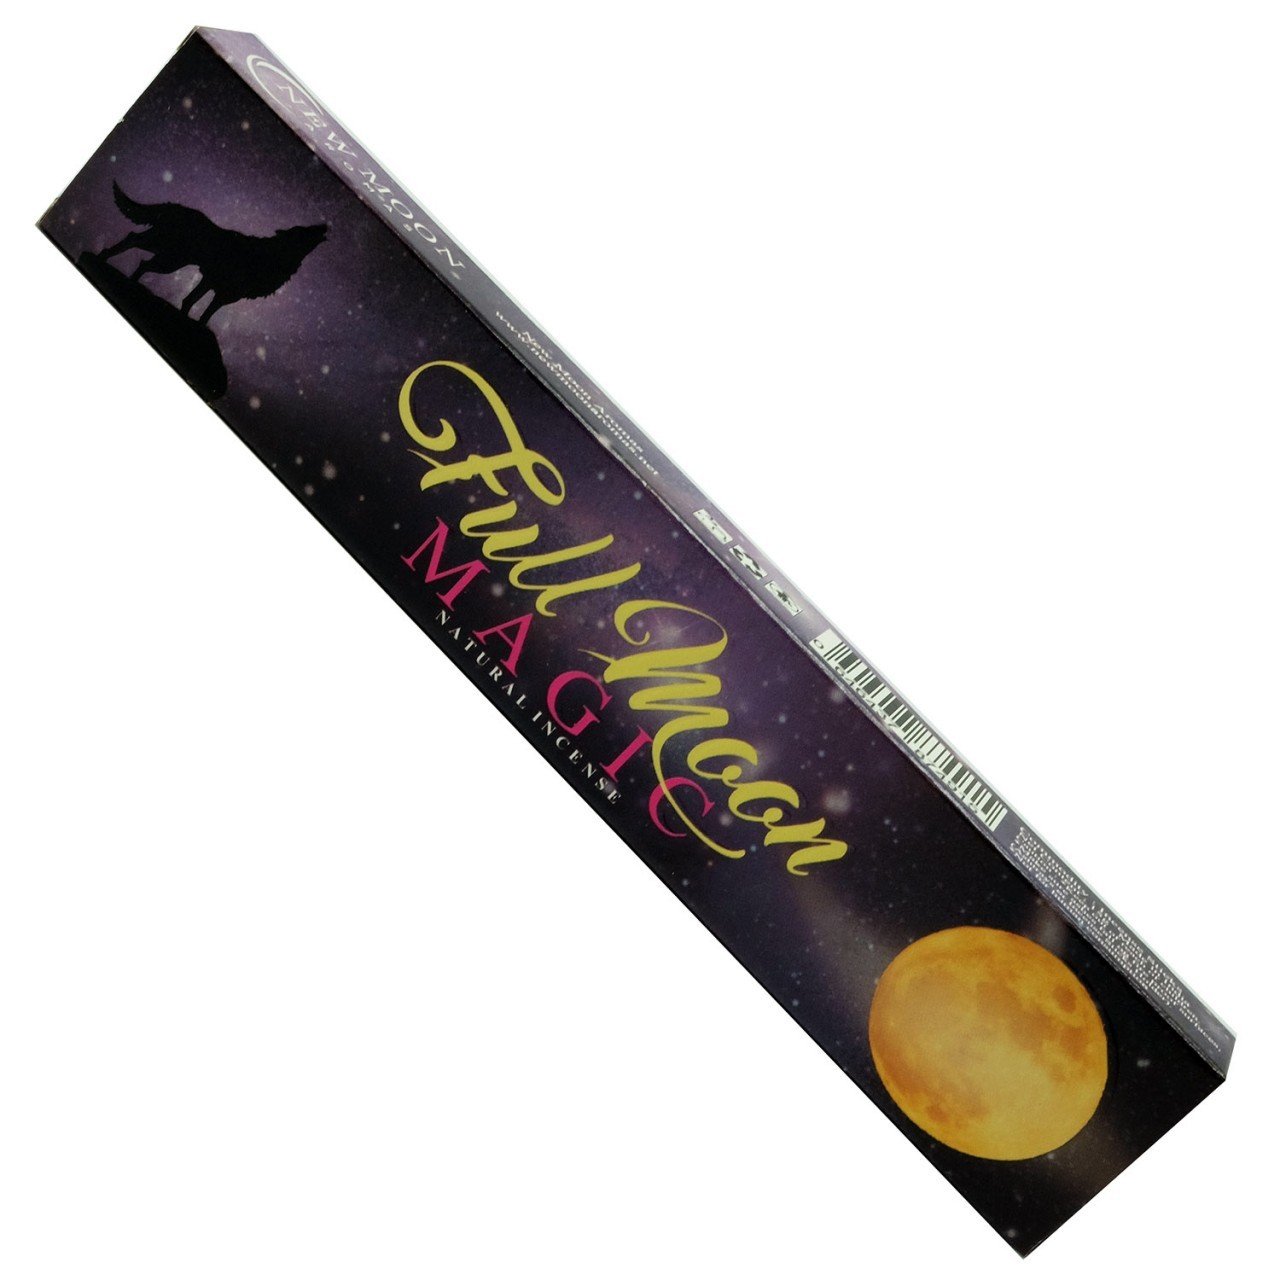 Full Moon Incense 15gms - The Spirit of Life